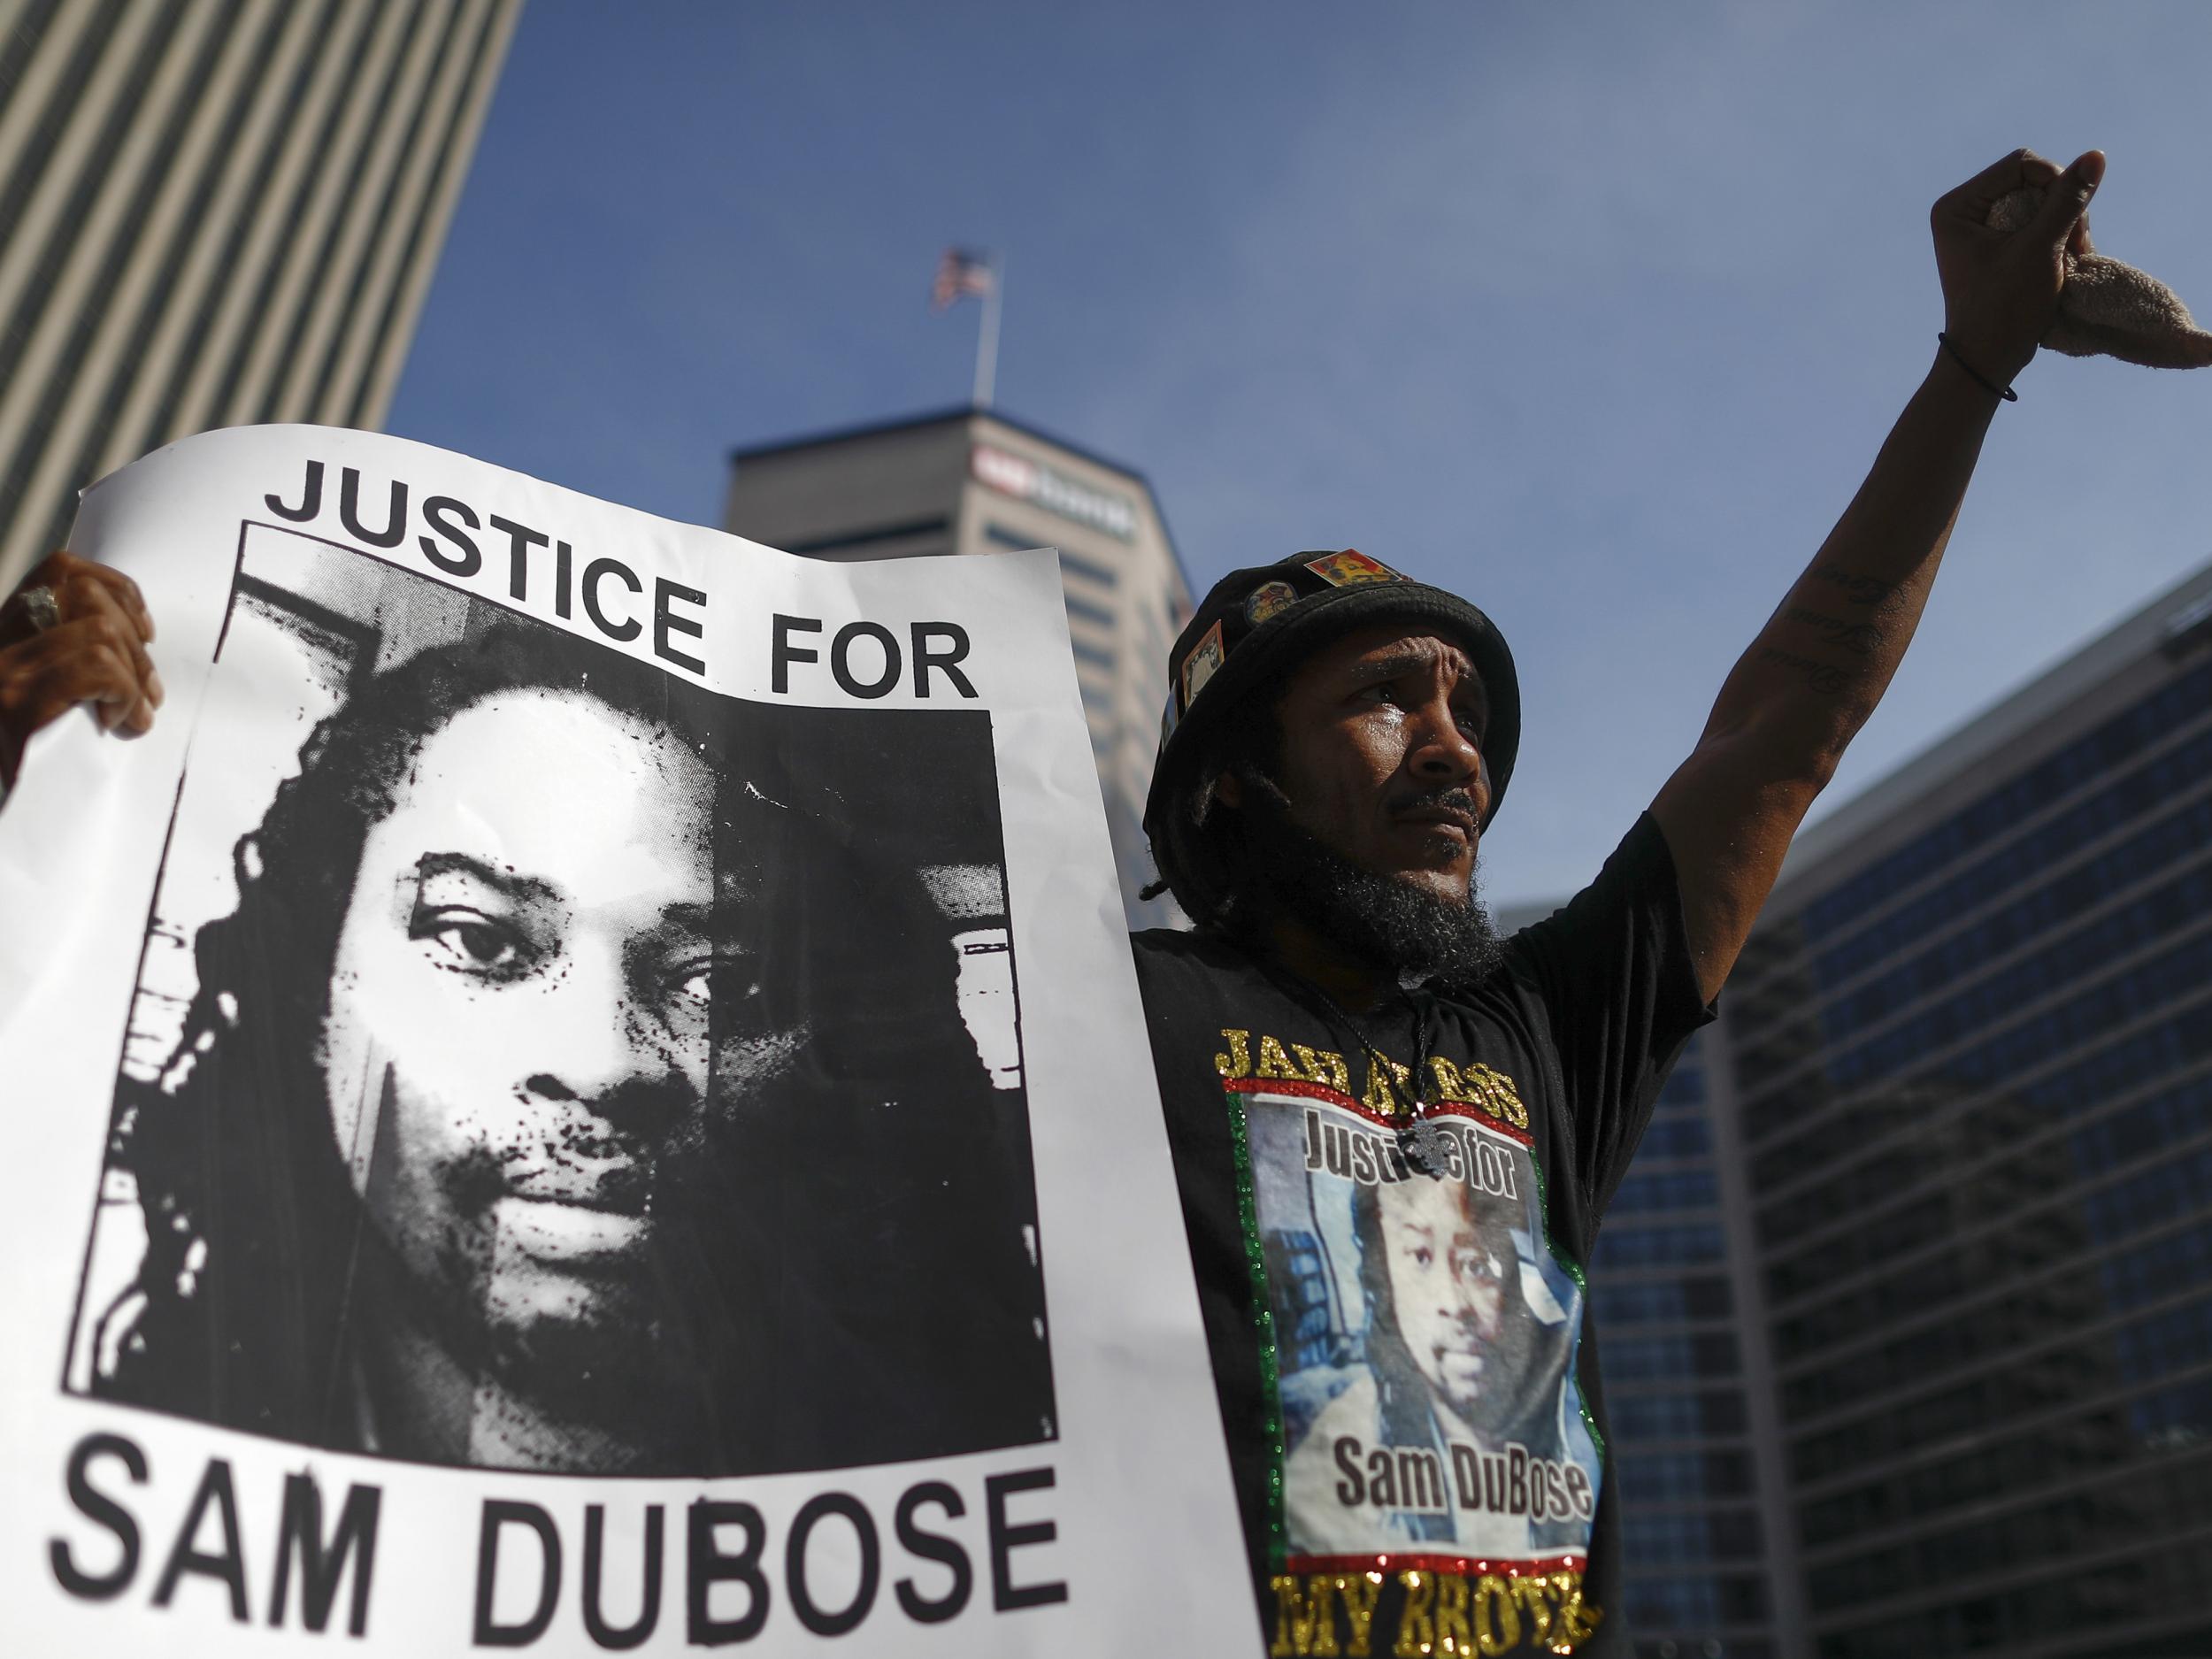 A protester raises his fist during a demonstration demanding former University of Cincinnati police officer Ray Tensing be retried for murder in the shooting death of motorist Sam DuBose on 22 July